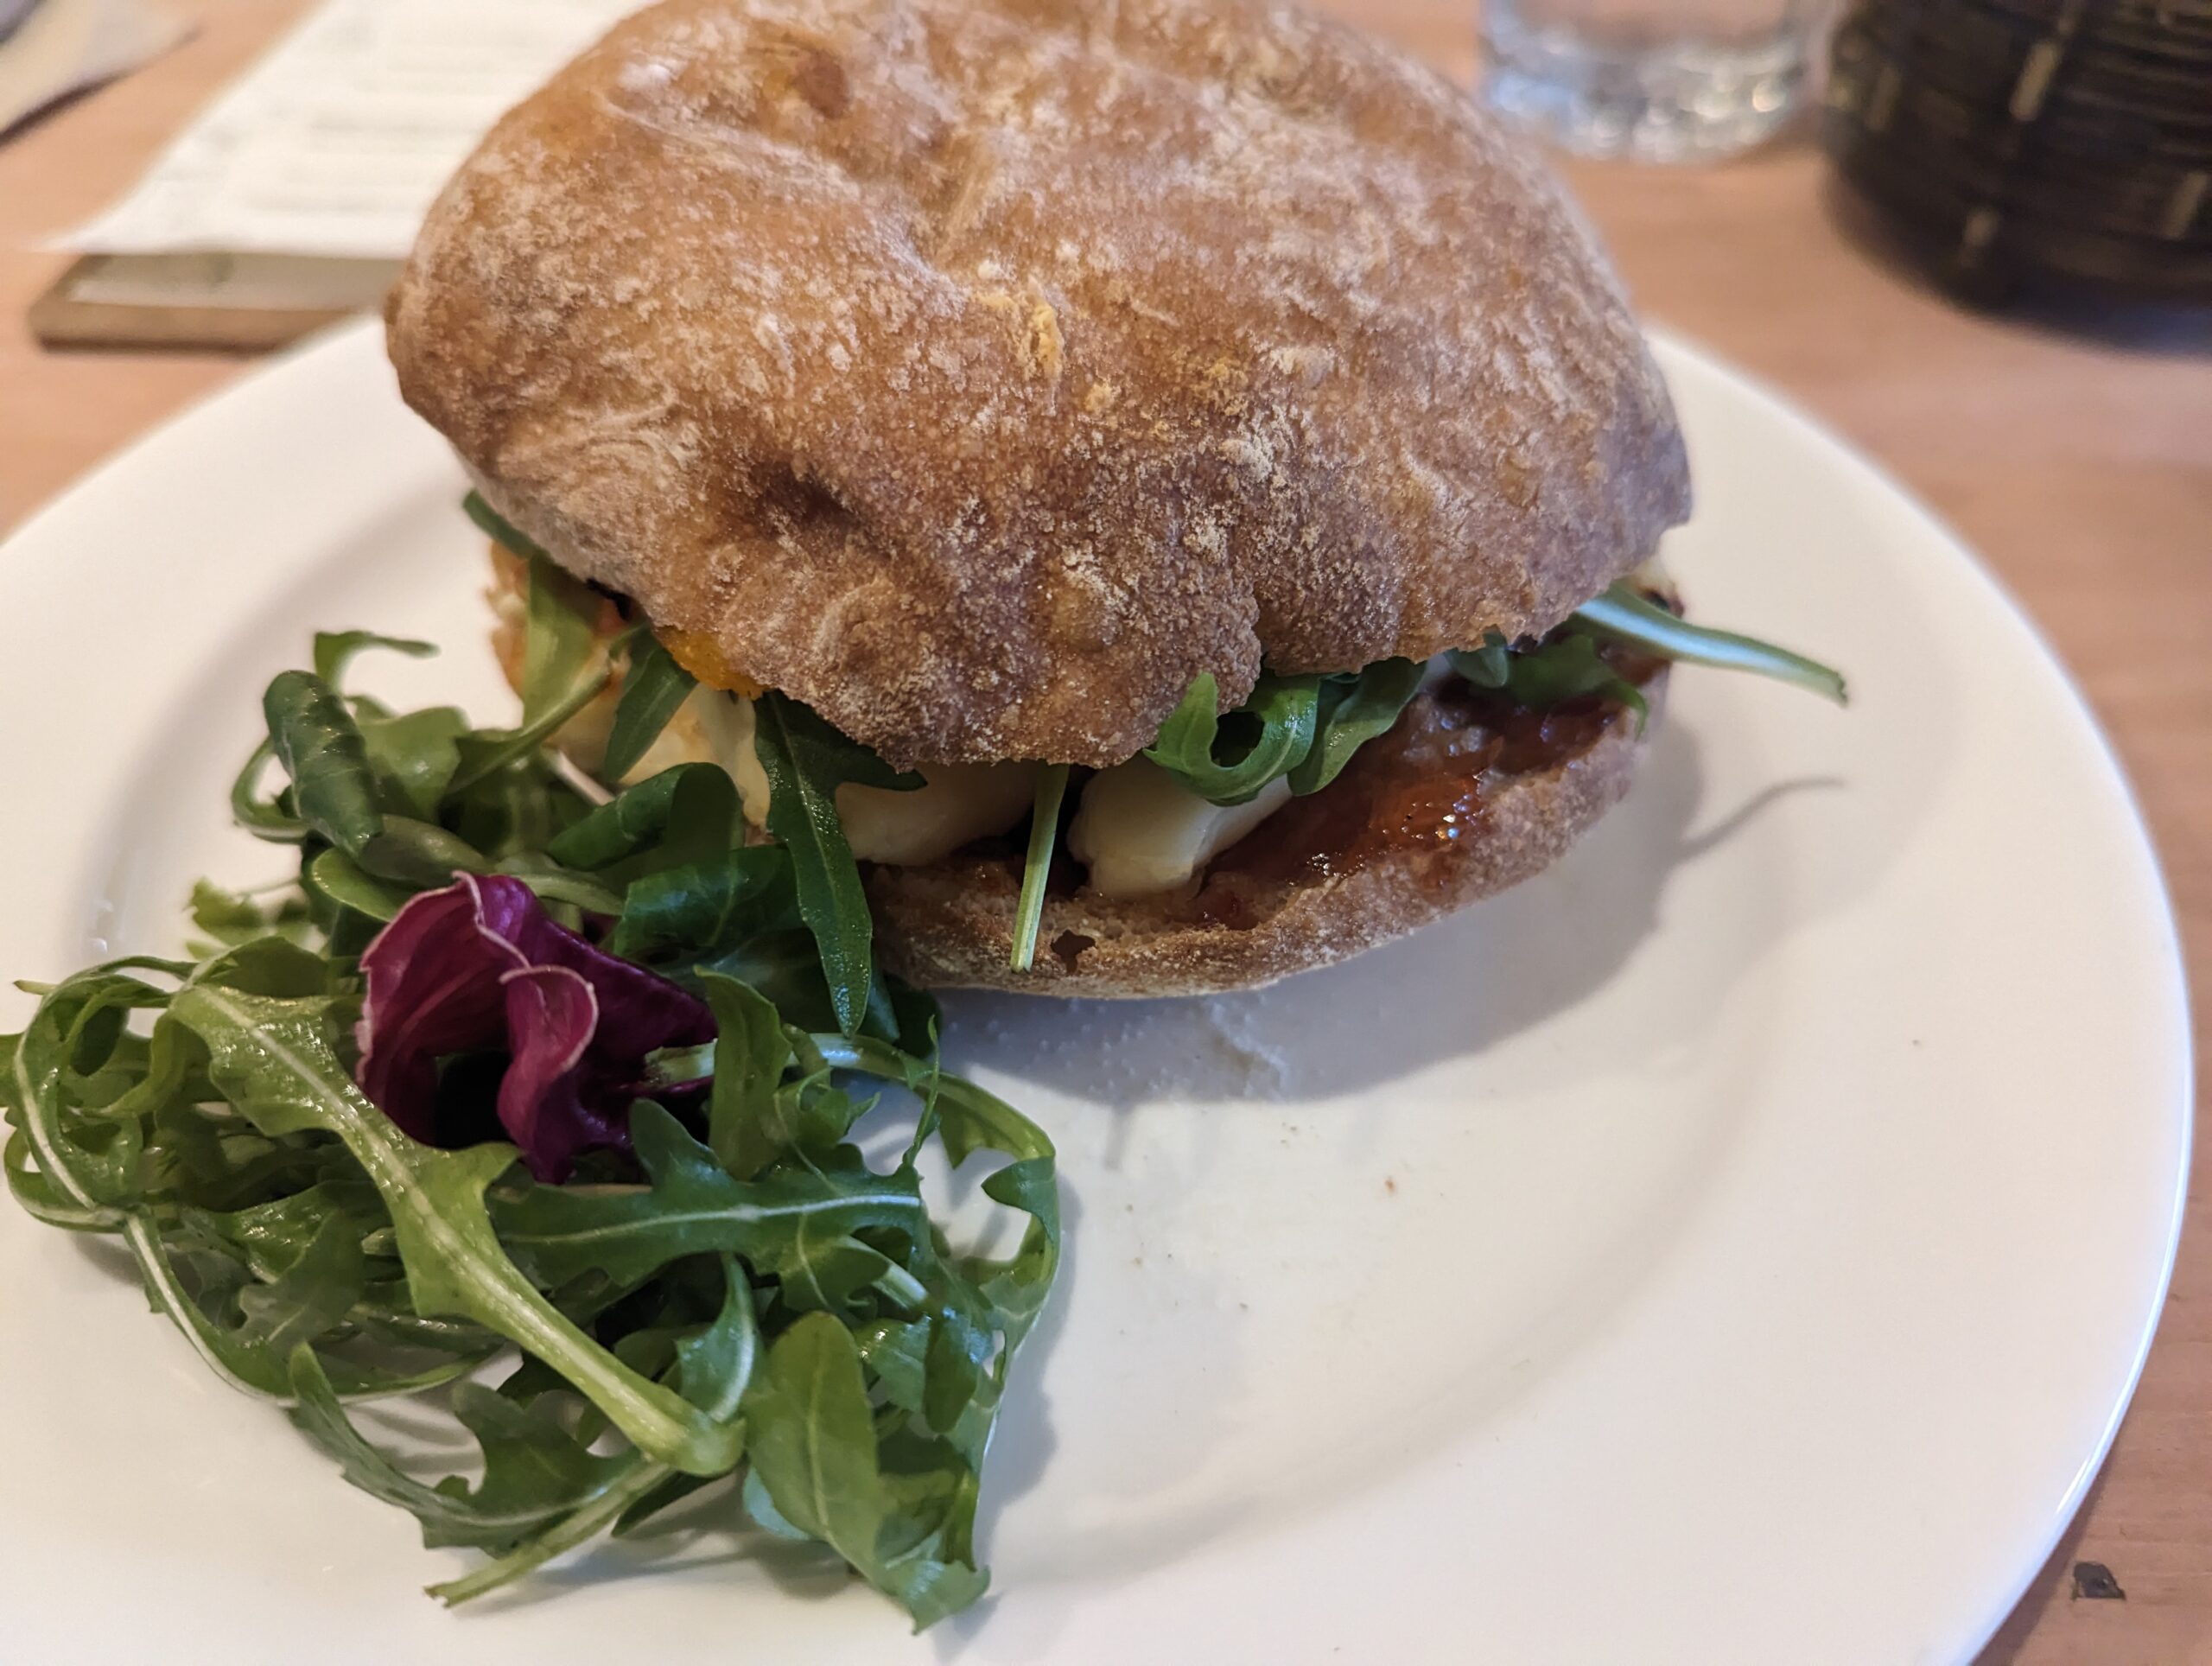 A ciabatta at the honey pot cafe with rocket, squash puree and halloumi on a white plate.